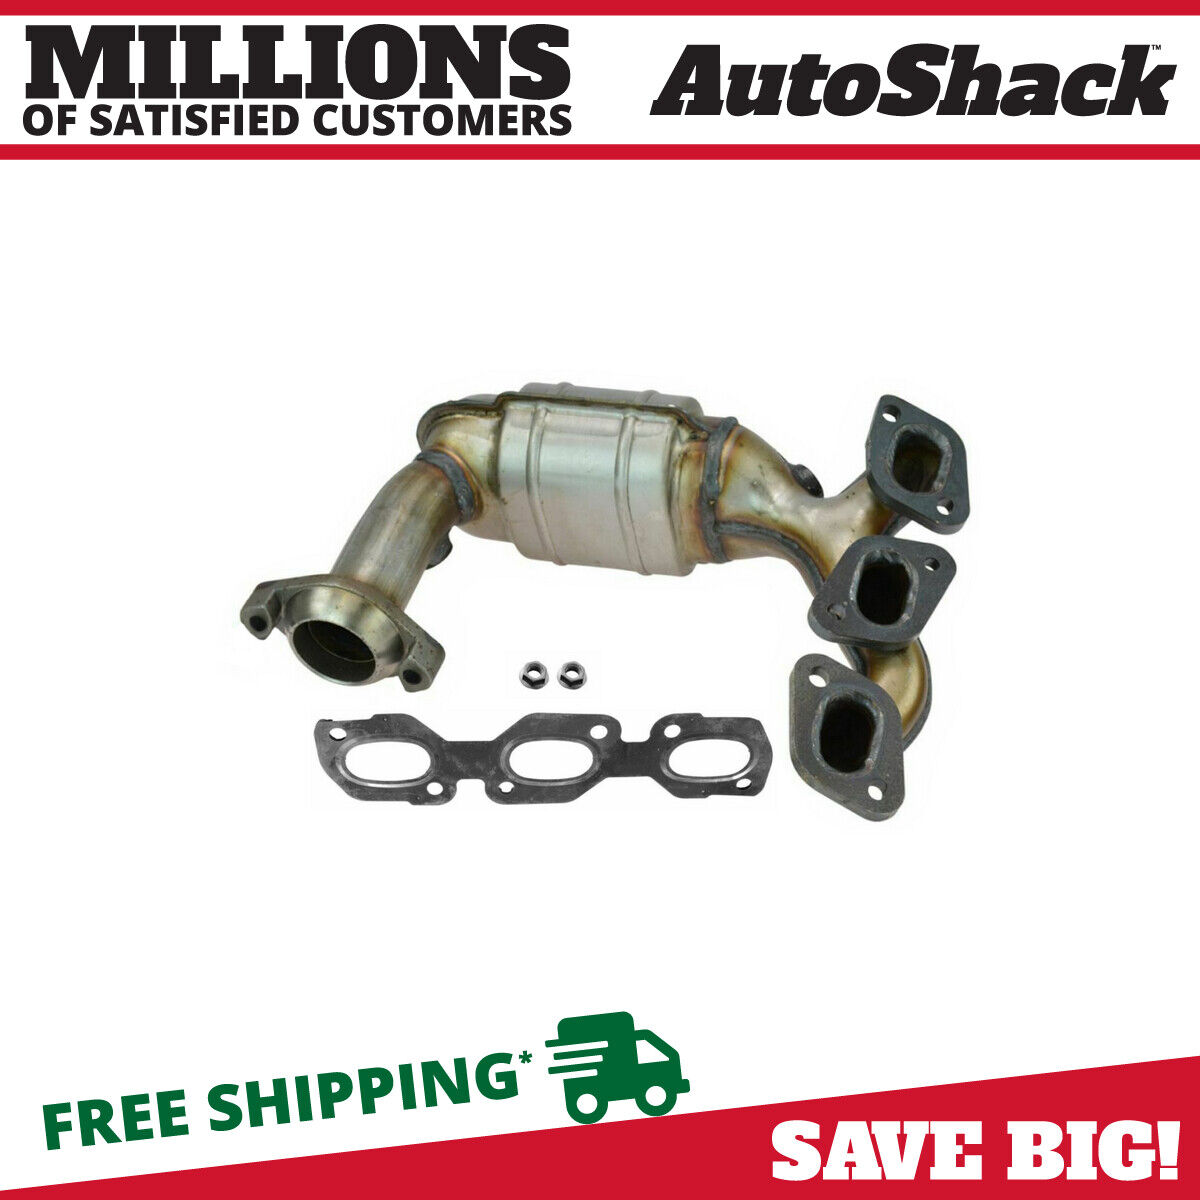 Front Exhaust Manifold Catalytic Converter for Tribute Mariner Ford Escape 3.0L